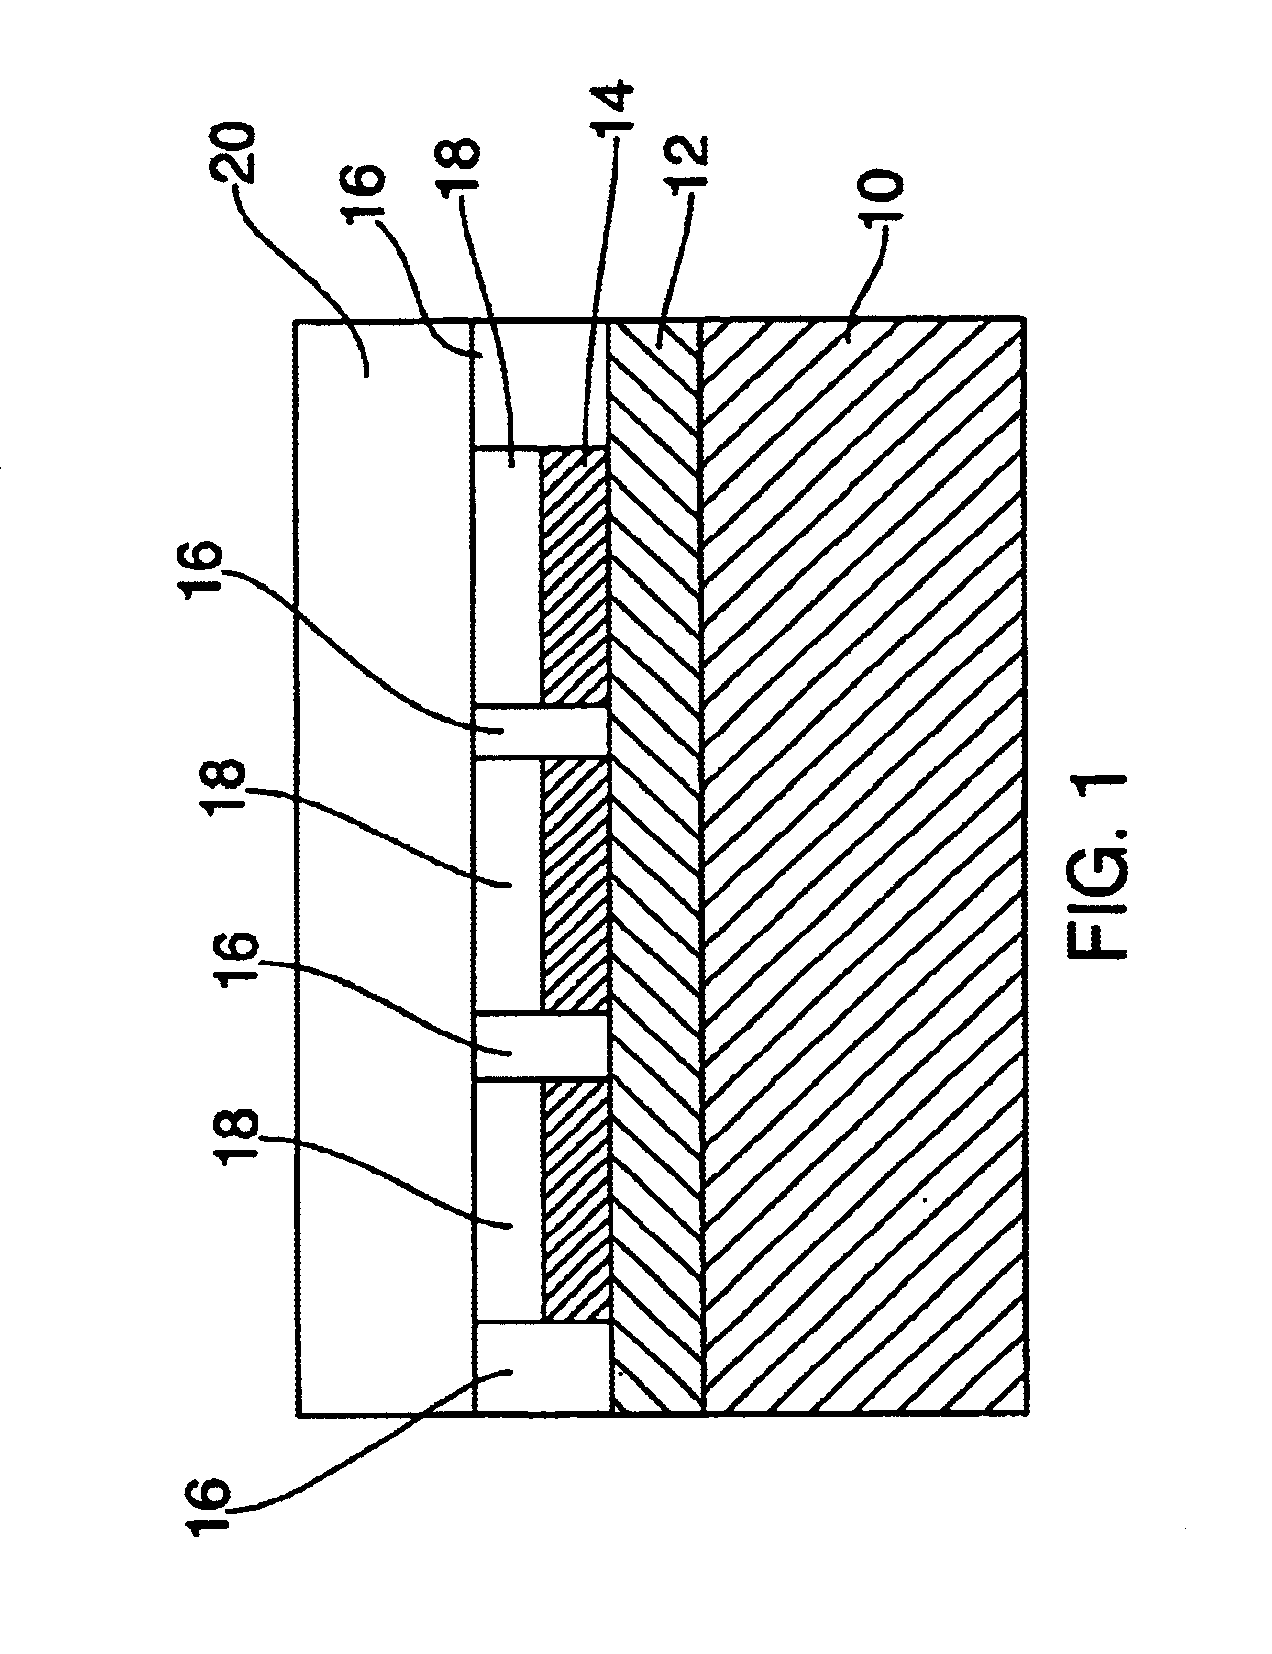 Tuneable ferroelectric decoupling capacitor